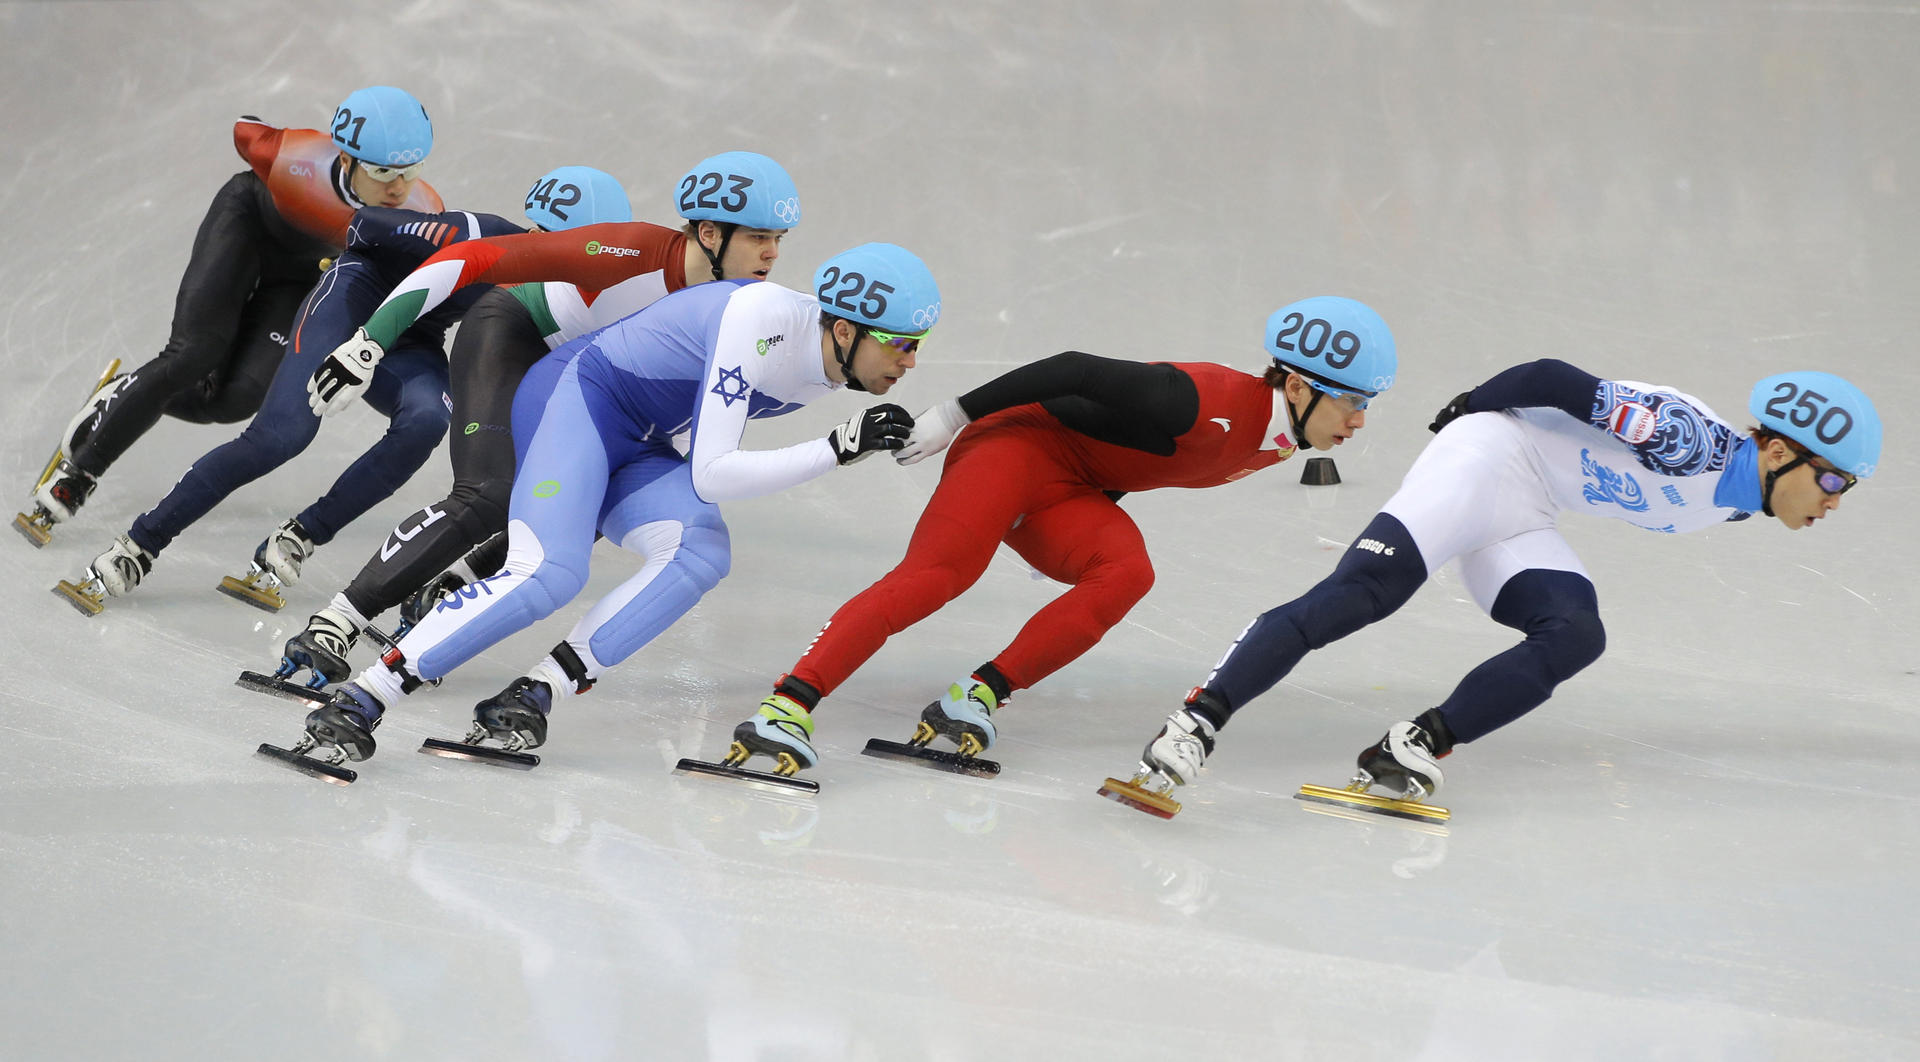 Hong Kong's Barton Lui trails the pack of speed skaters in his heat. Photo: AP